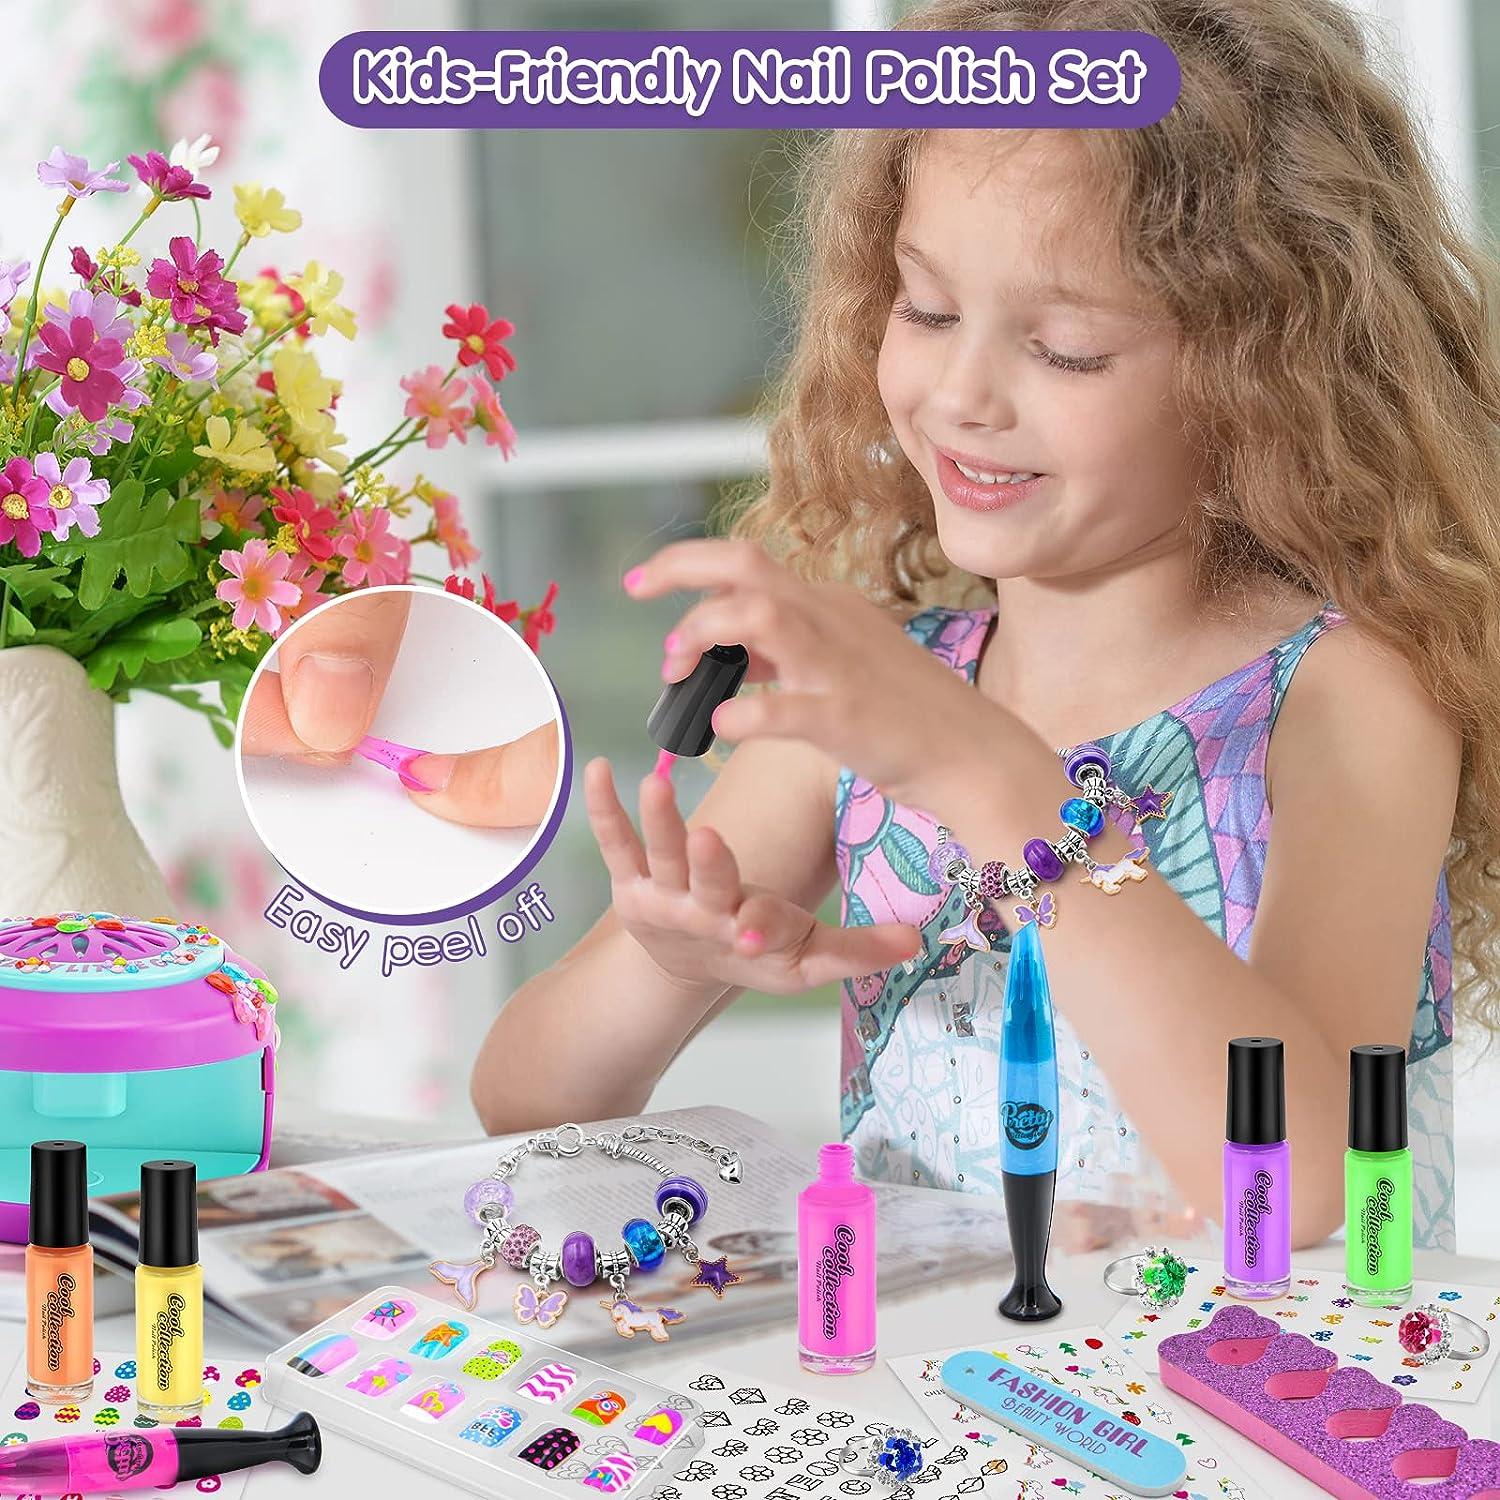 Buy Kids Nail Varnish Set with Nail Dryer, Peel Off Nail Polish Set for Kids,  Girls Toys for 5 6 7 8 9 years old Online In India At Discounted Prices